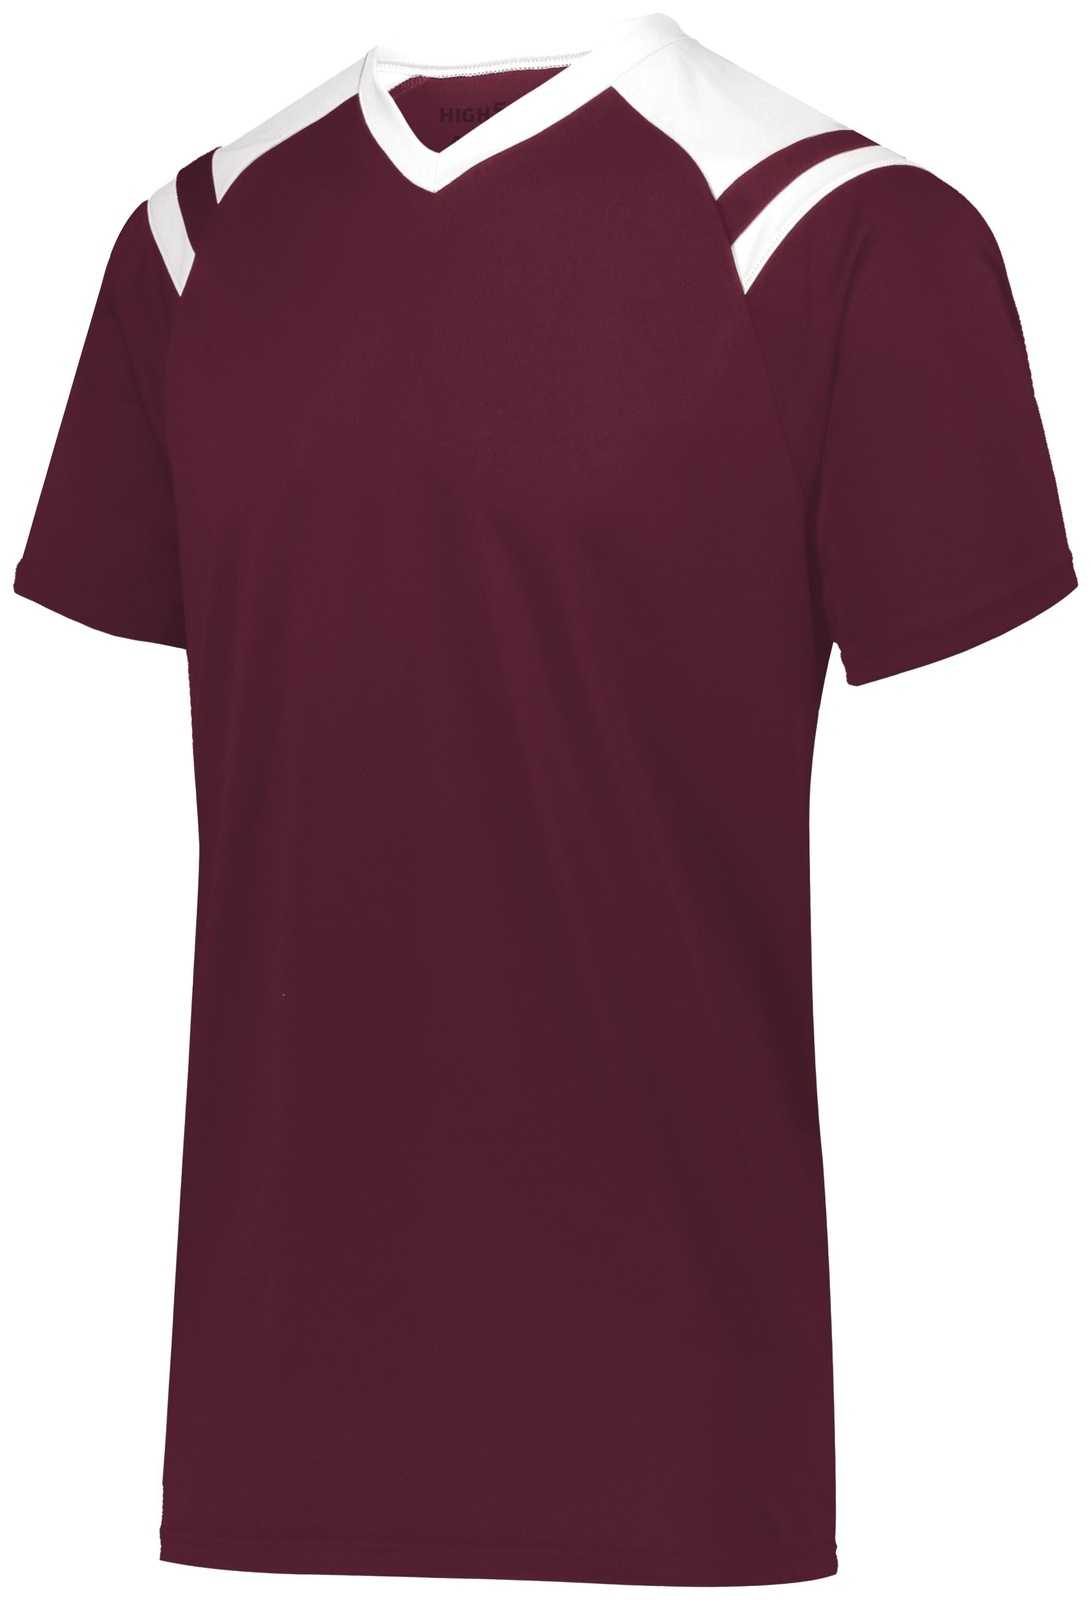 High Five 322971 Youth Sheffield Jersey - Maroon White - HIT a Double